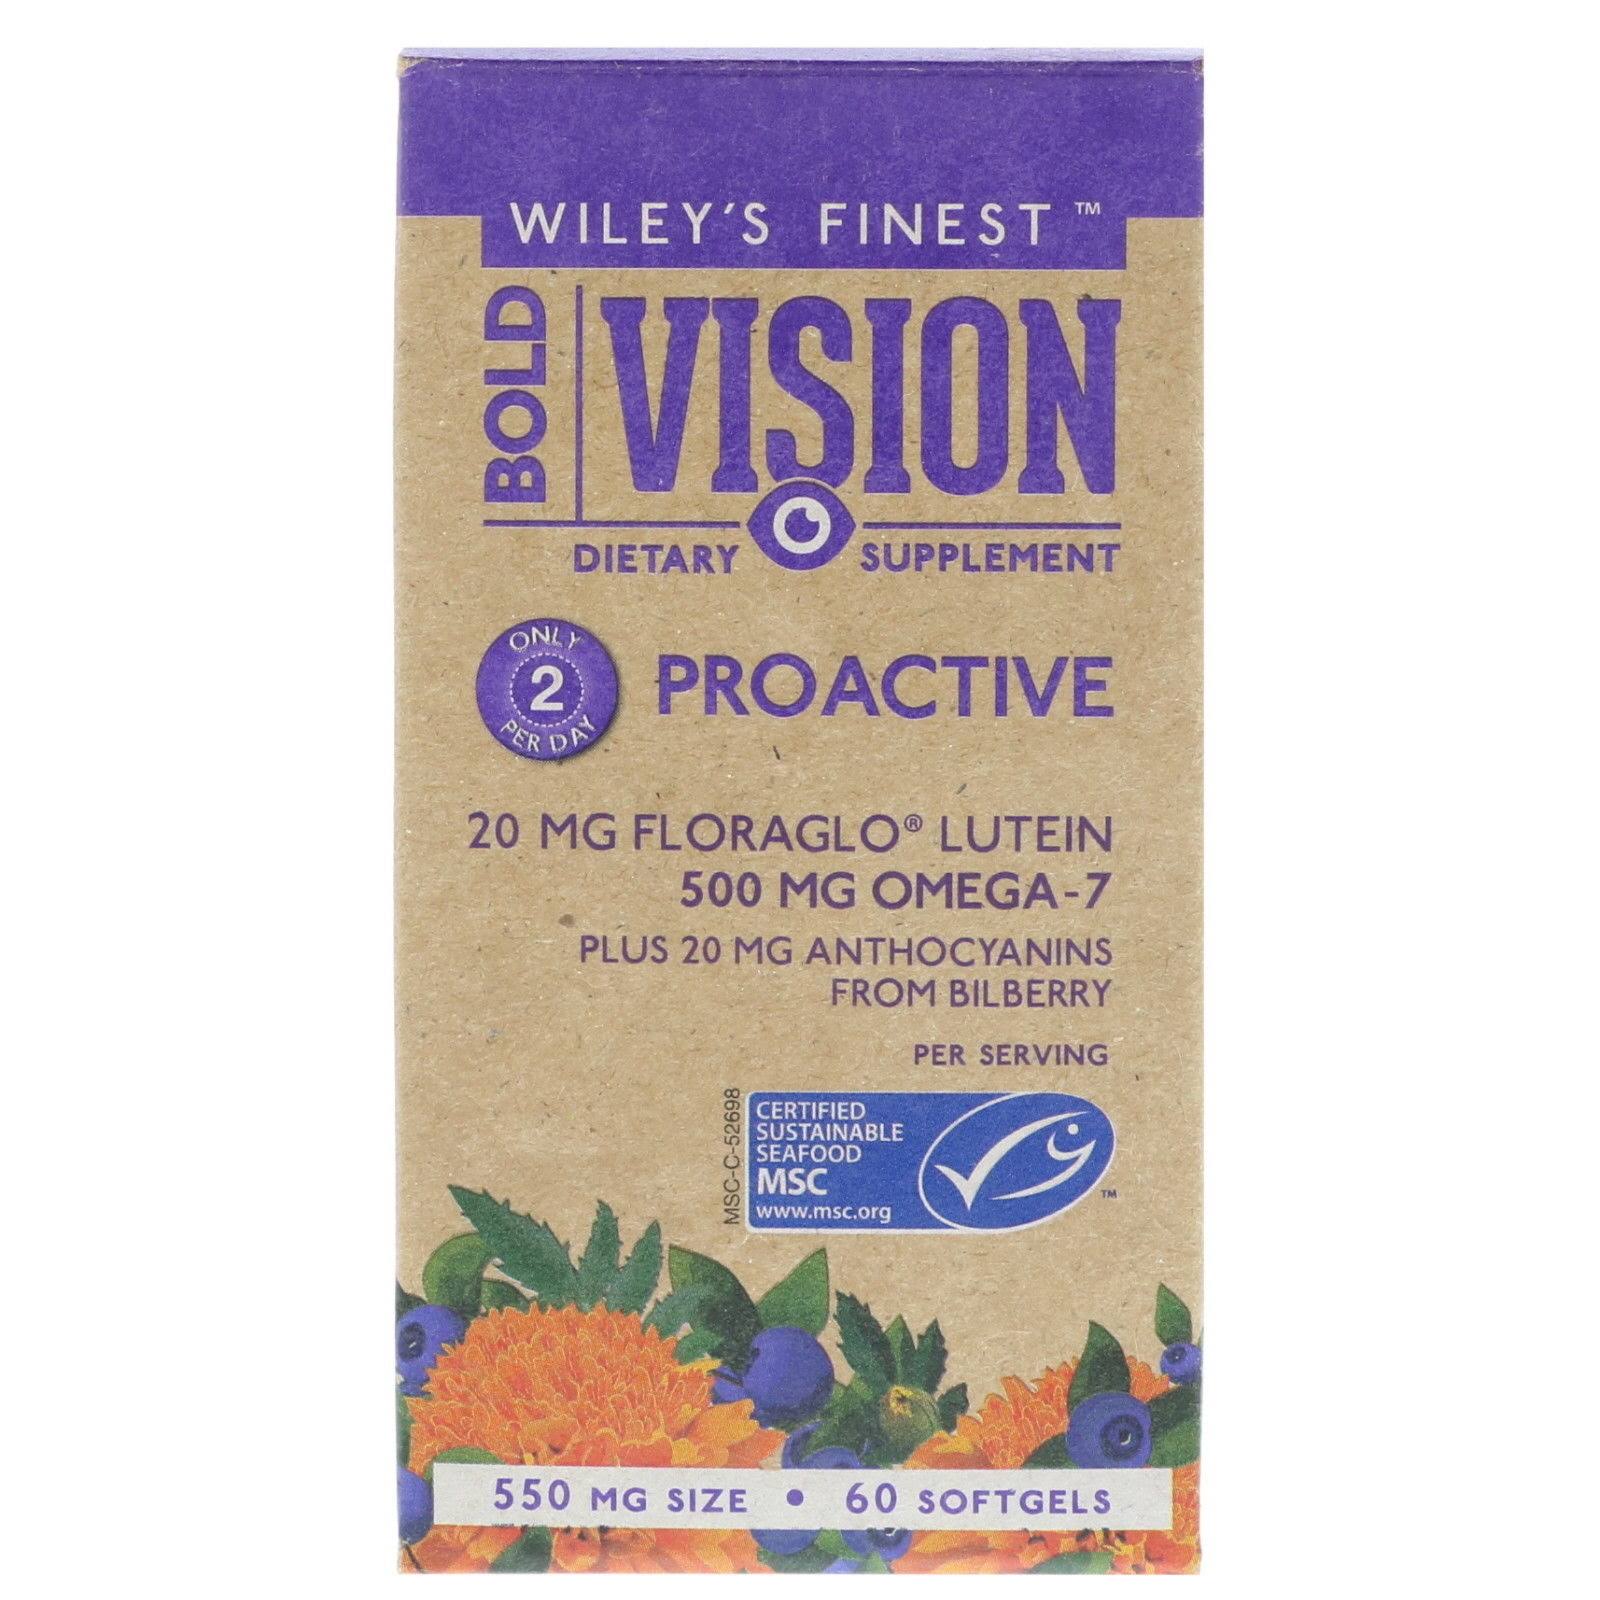 Wiley's Finest Bold Vision Proactive 60 Softgels